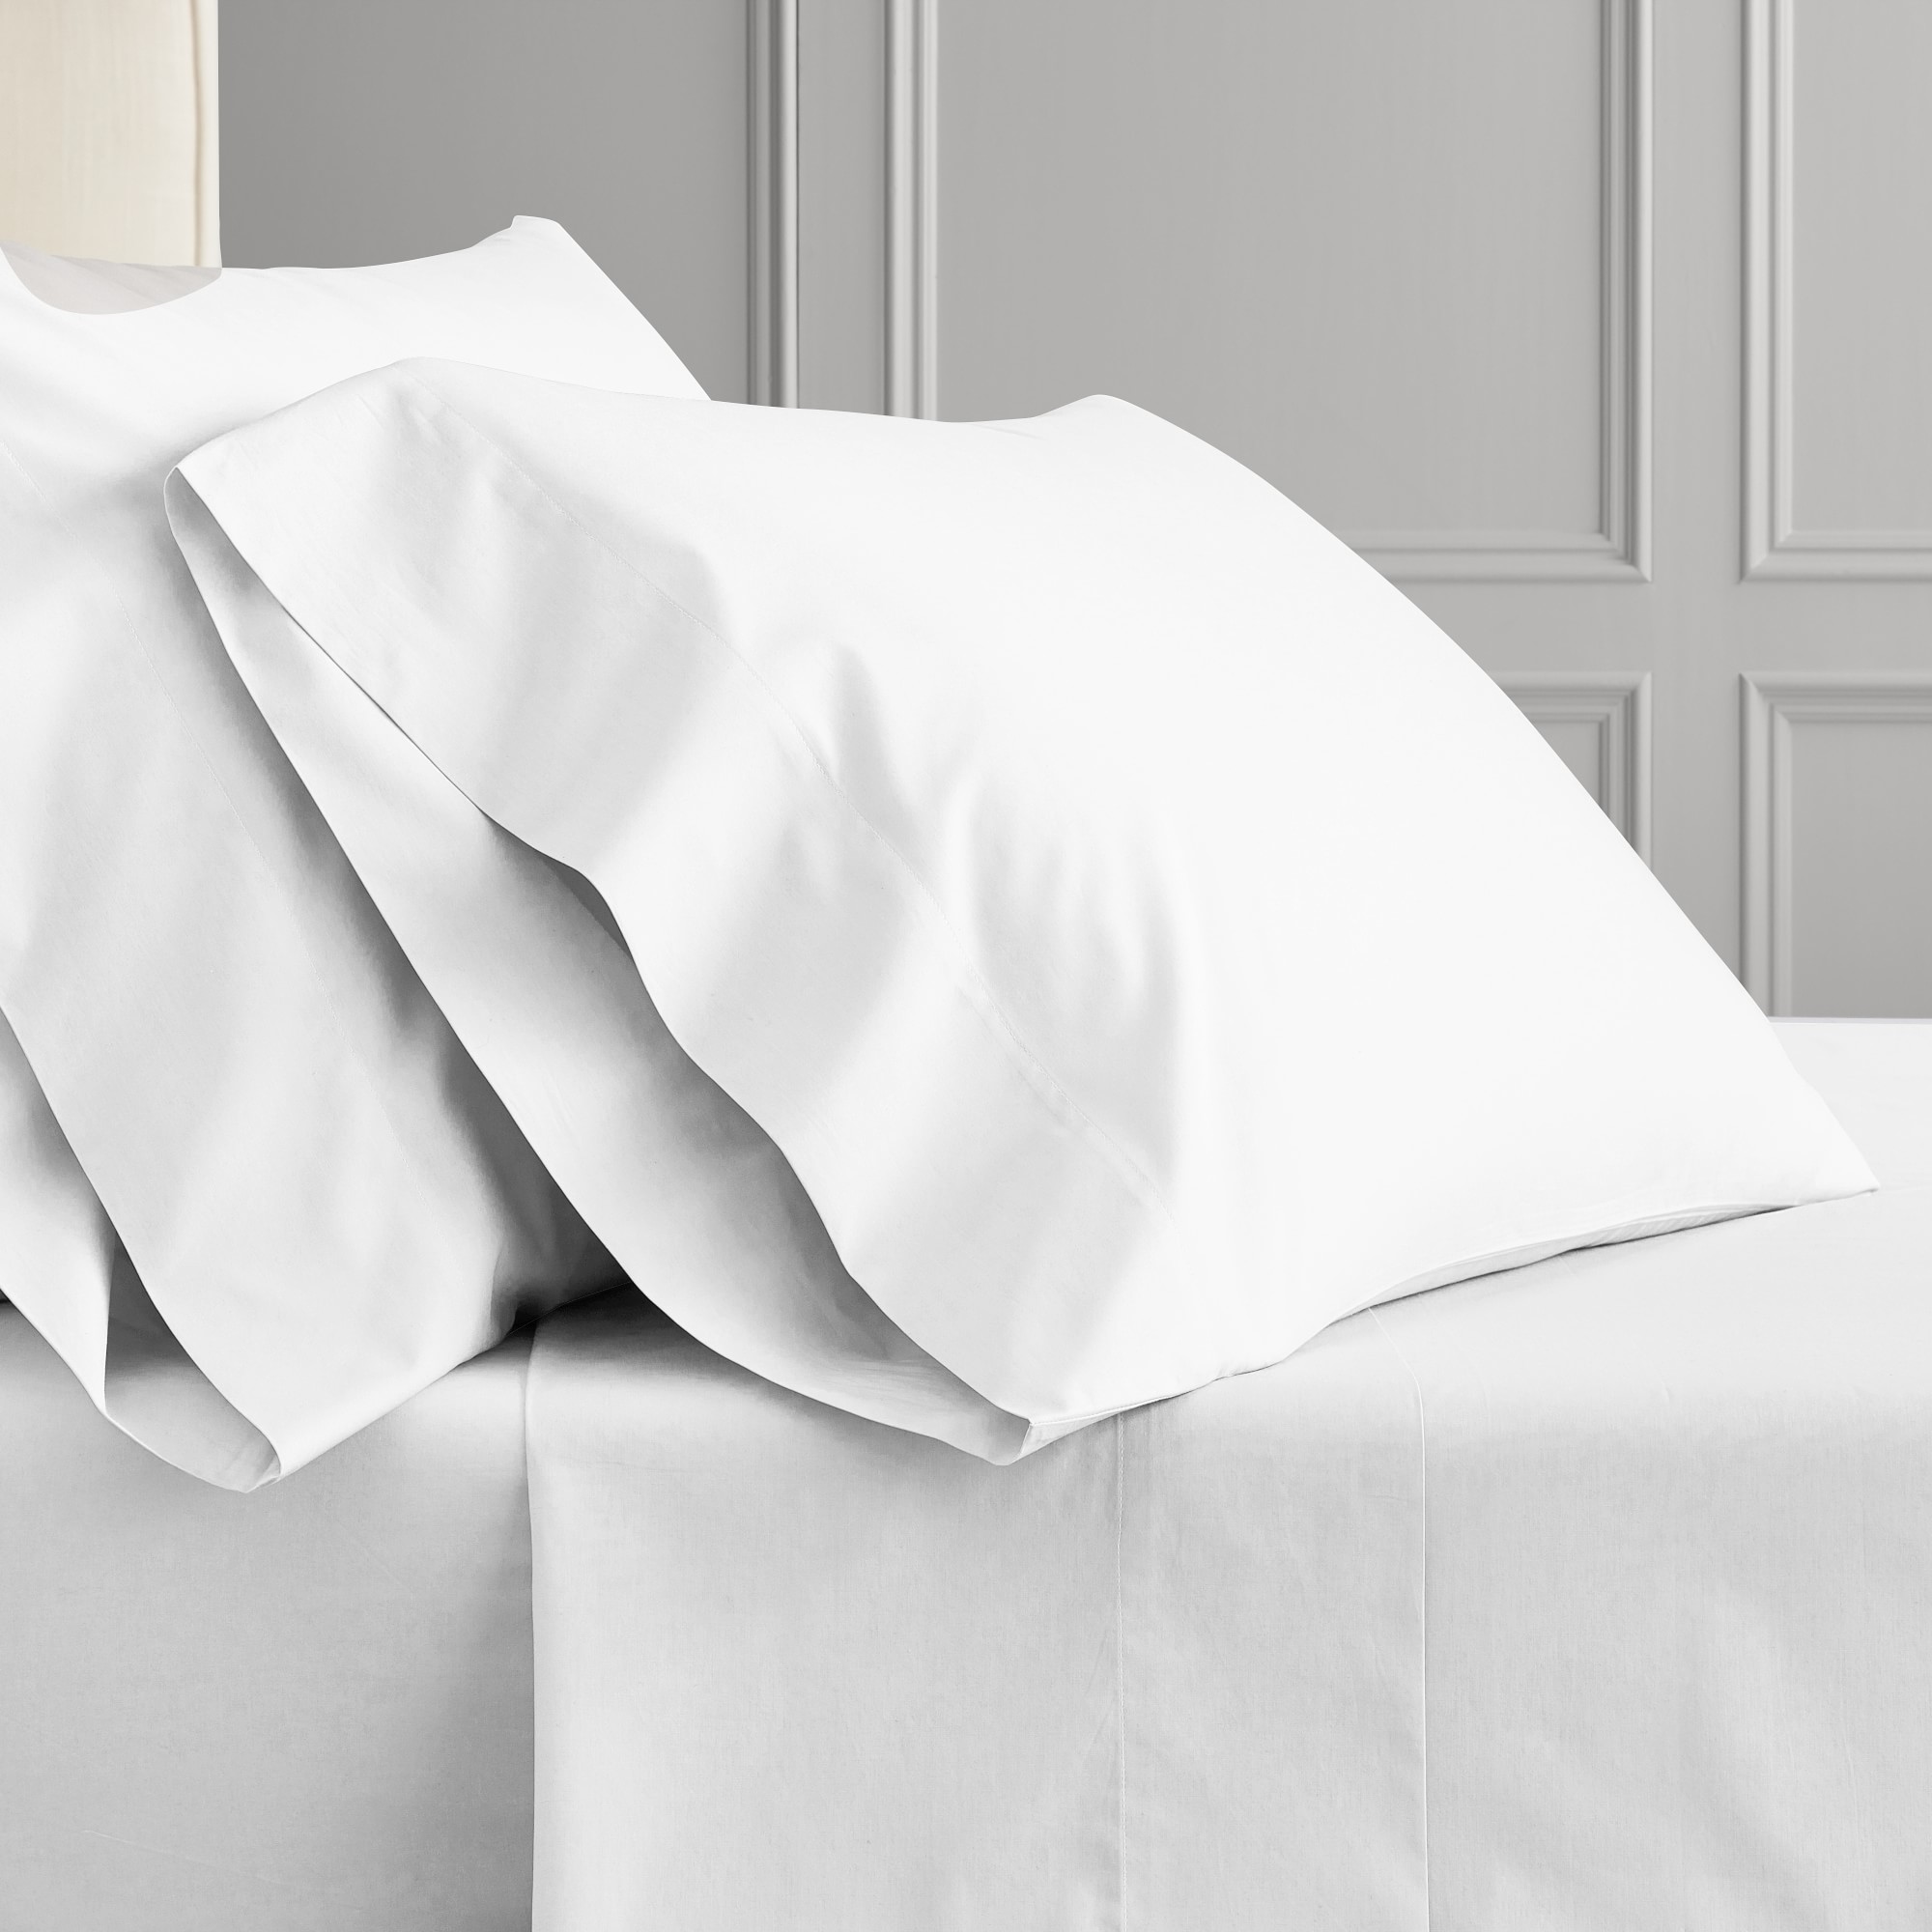 Chambers® Italian 600 Thread Count Percale Pillowcases, Set of 2, White